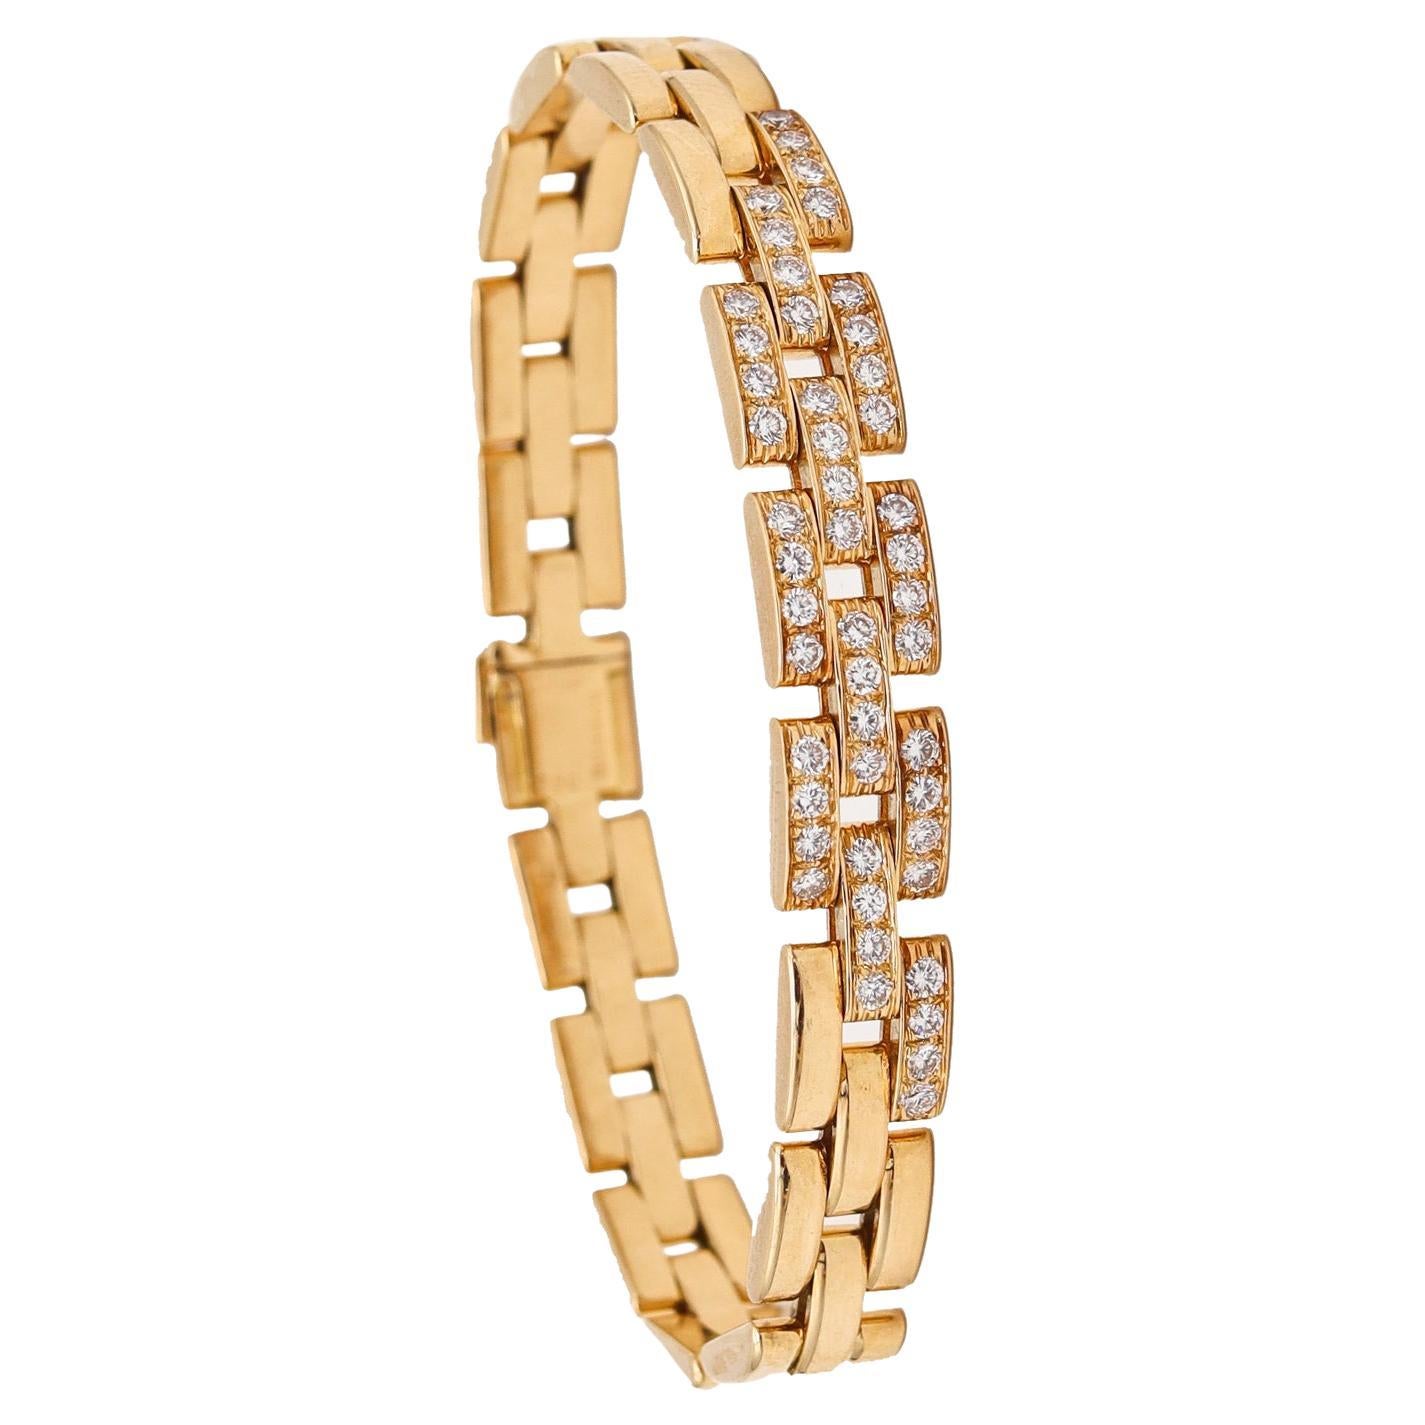 Cartier Paris Maillon Panthere Bracelet in 18kt Gold with 1.64ctw in Diamonds